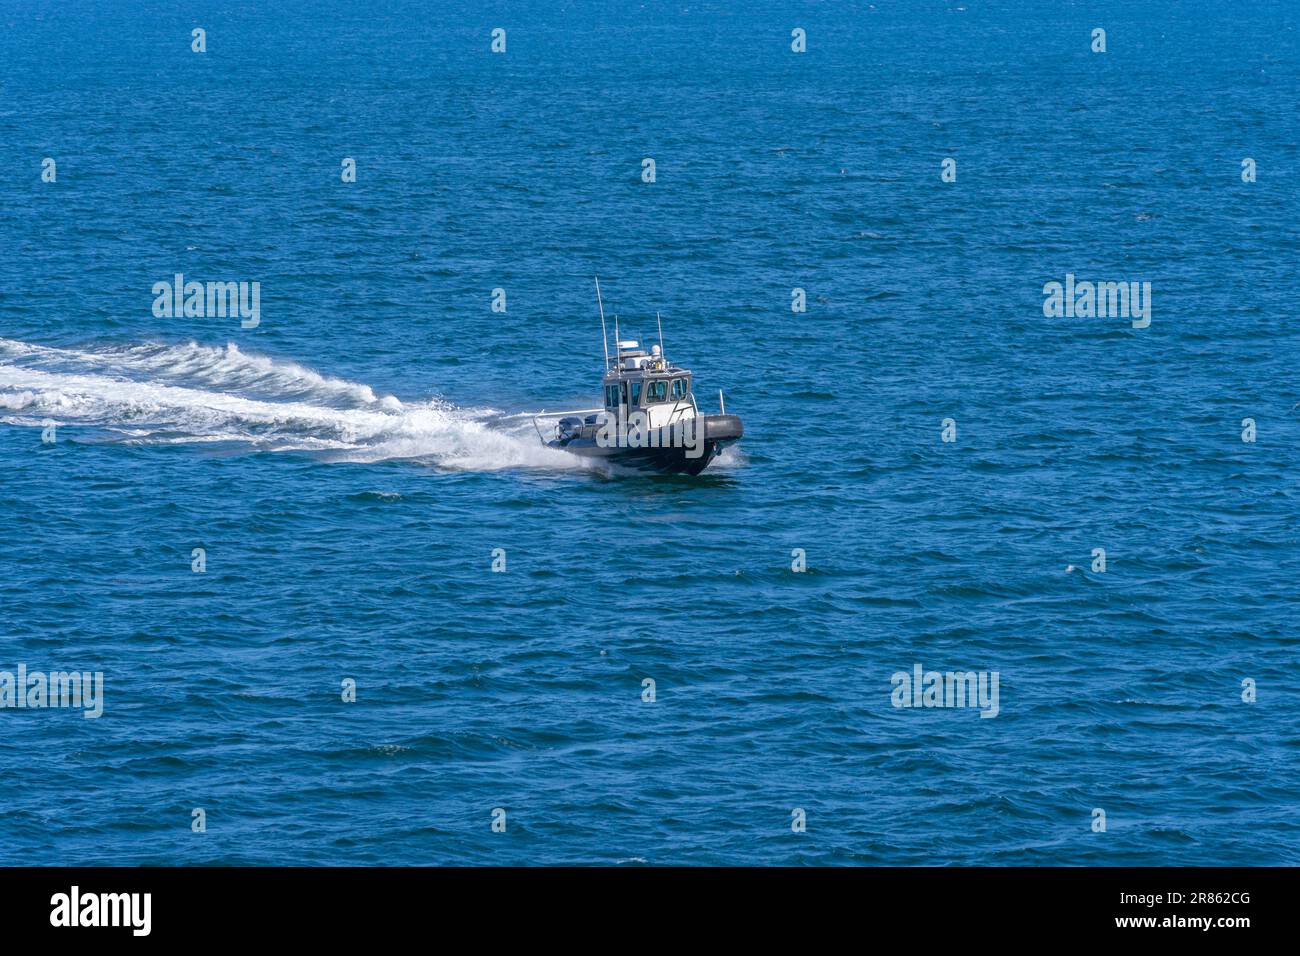 San Pedro, CA, USA – June 2, 2023: A Los Angeles Port Police boat speeds on the water at the Port of Los Angeles in San Pedro, California. Stock Photo